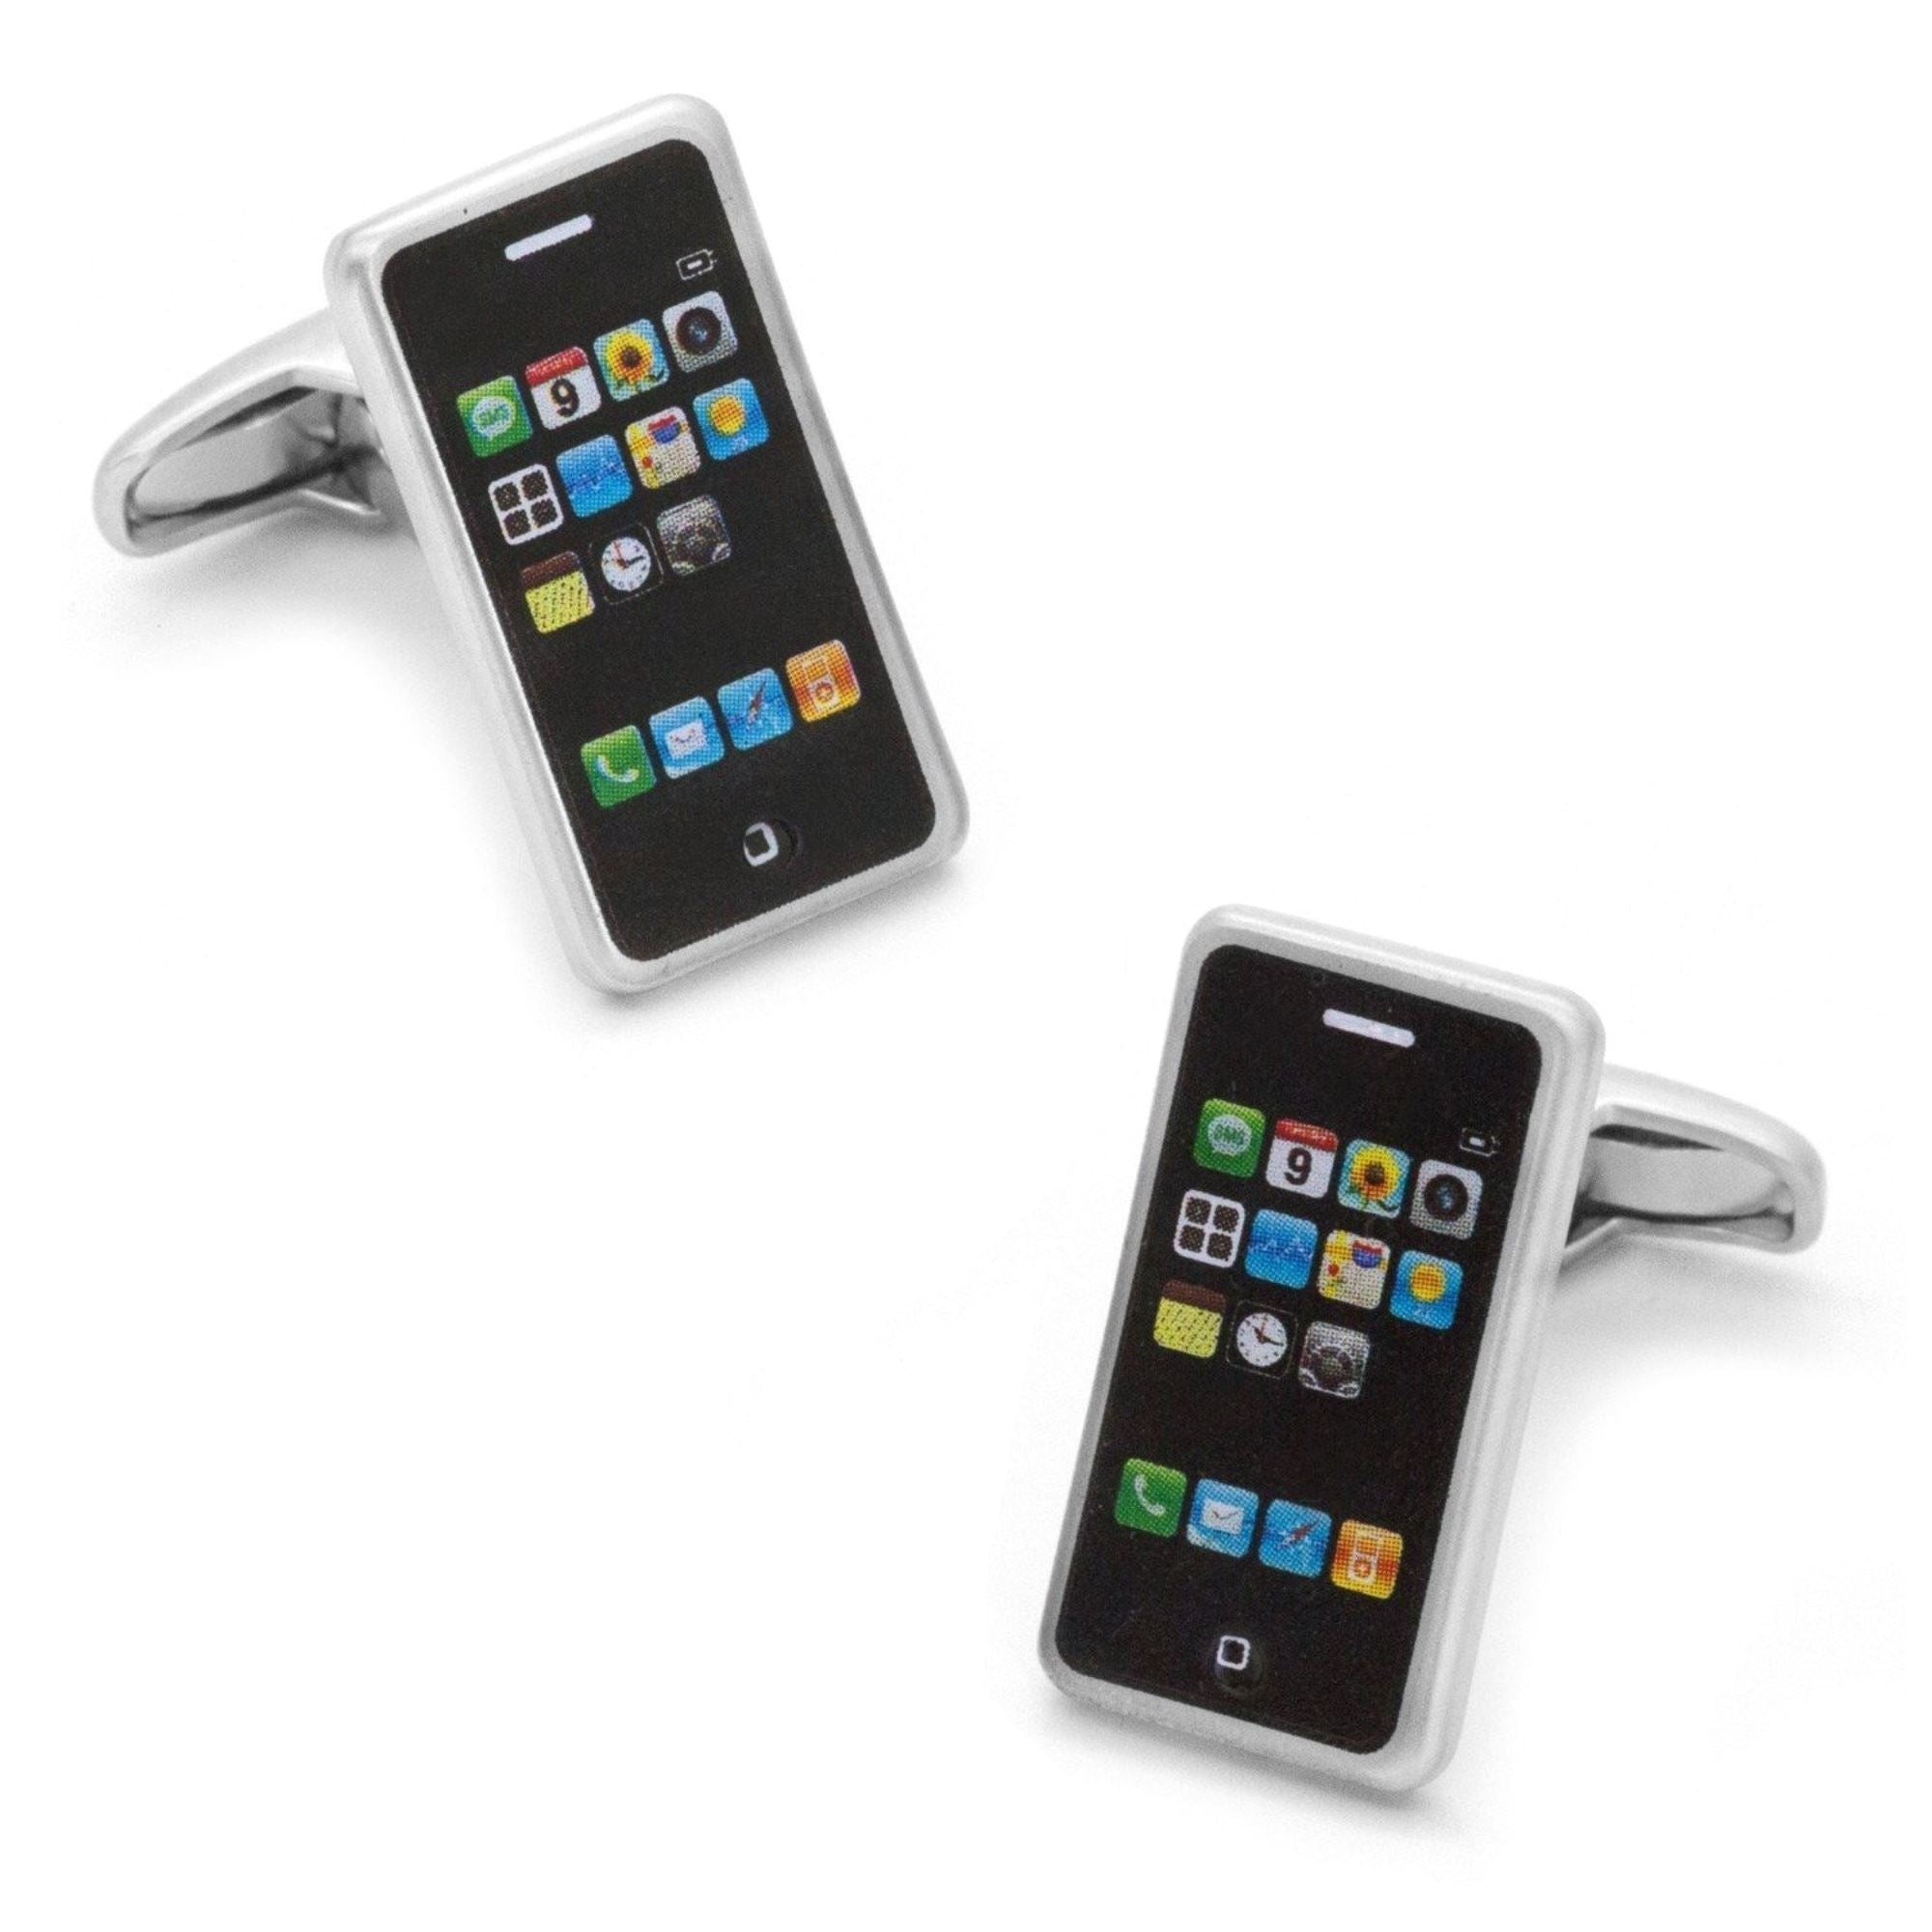 iPhone Mobile Phone Brushed Silver Cufflinks Novelty Cufflinks Clinks Australia iPhone Mobile Phone Brushed Silver Cufflinks 